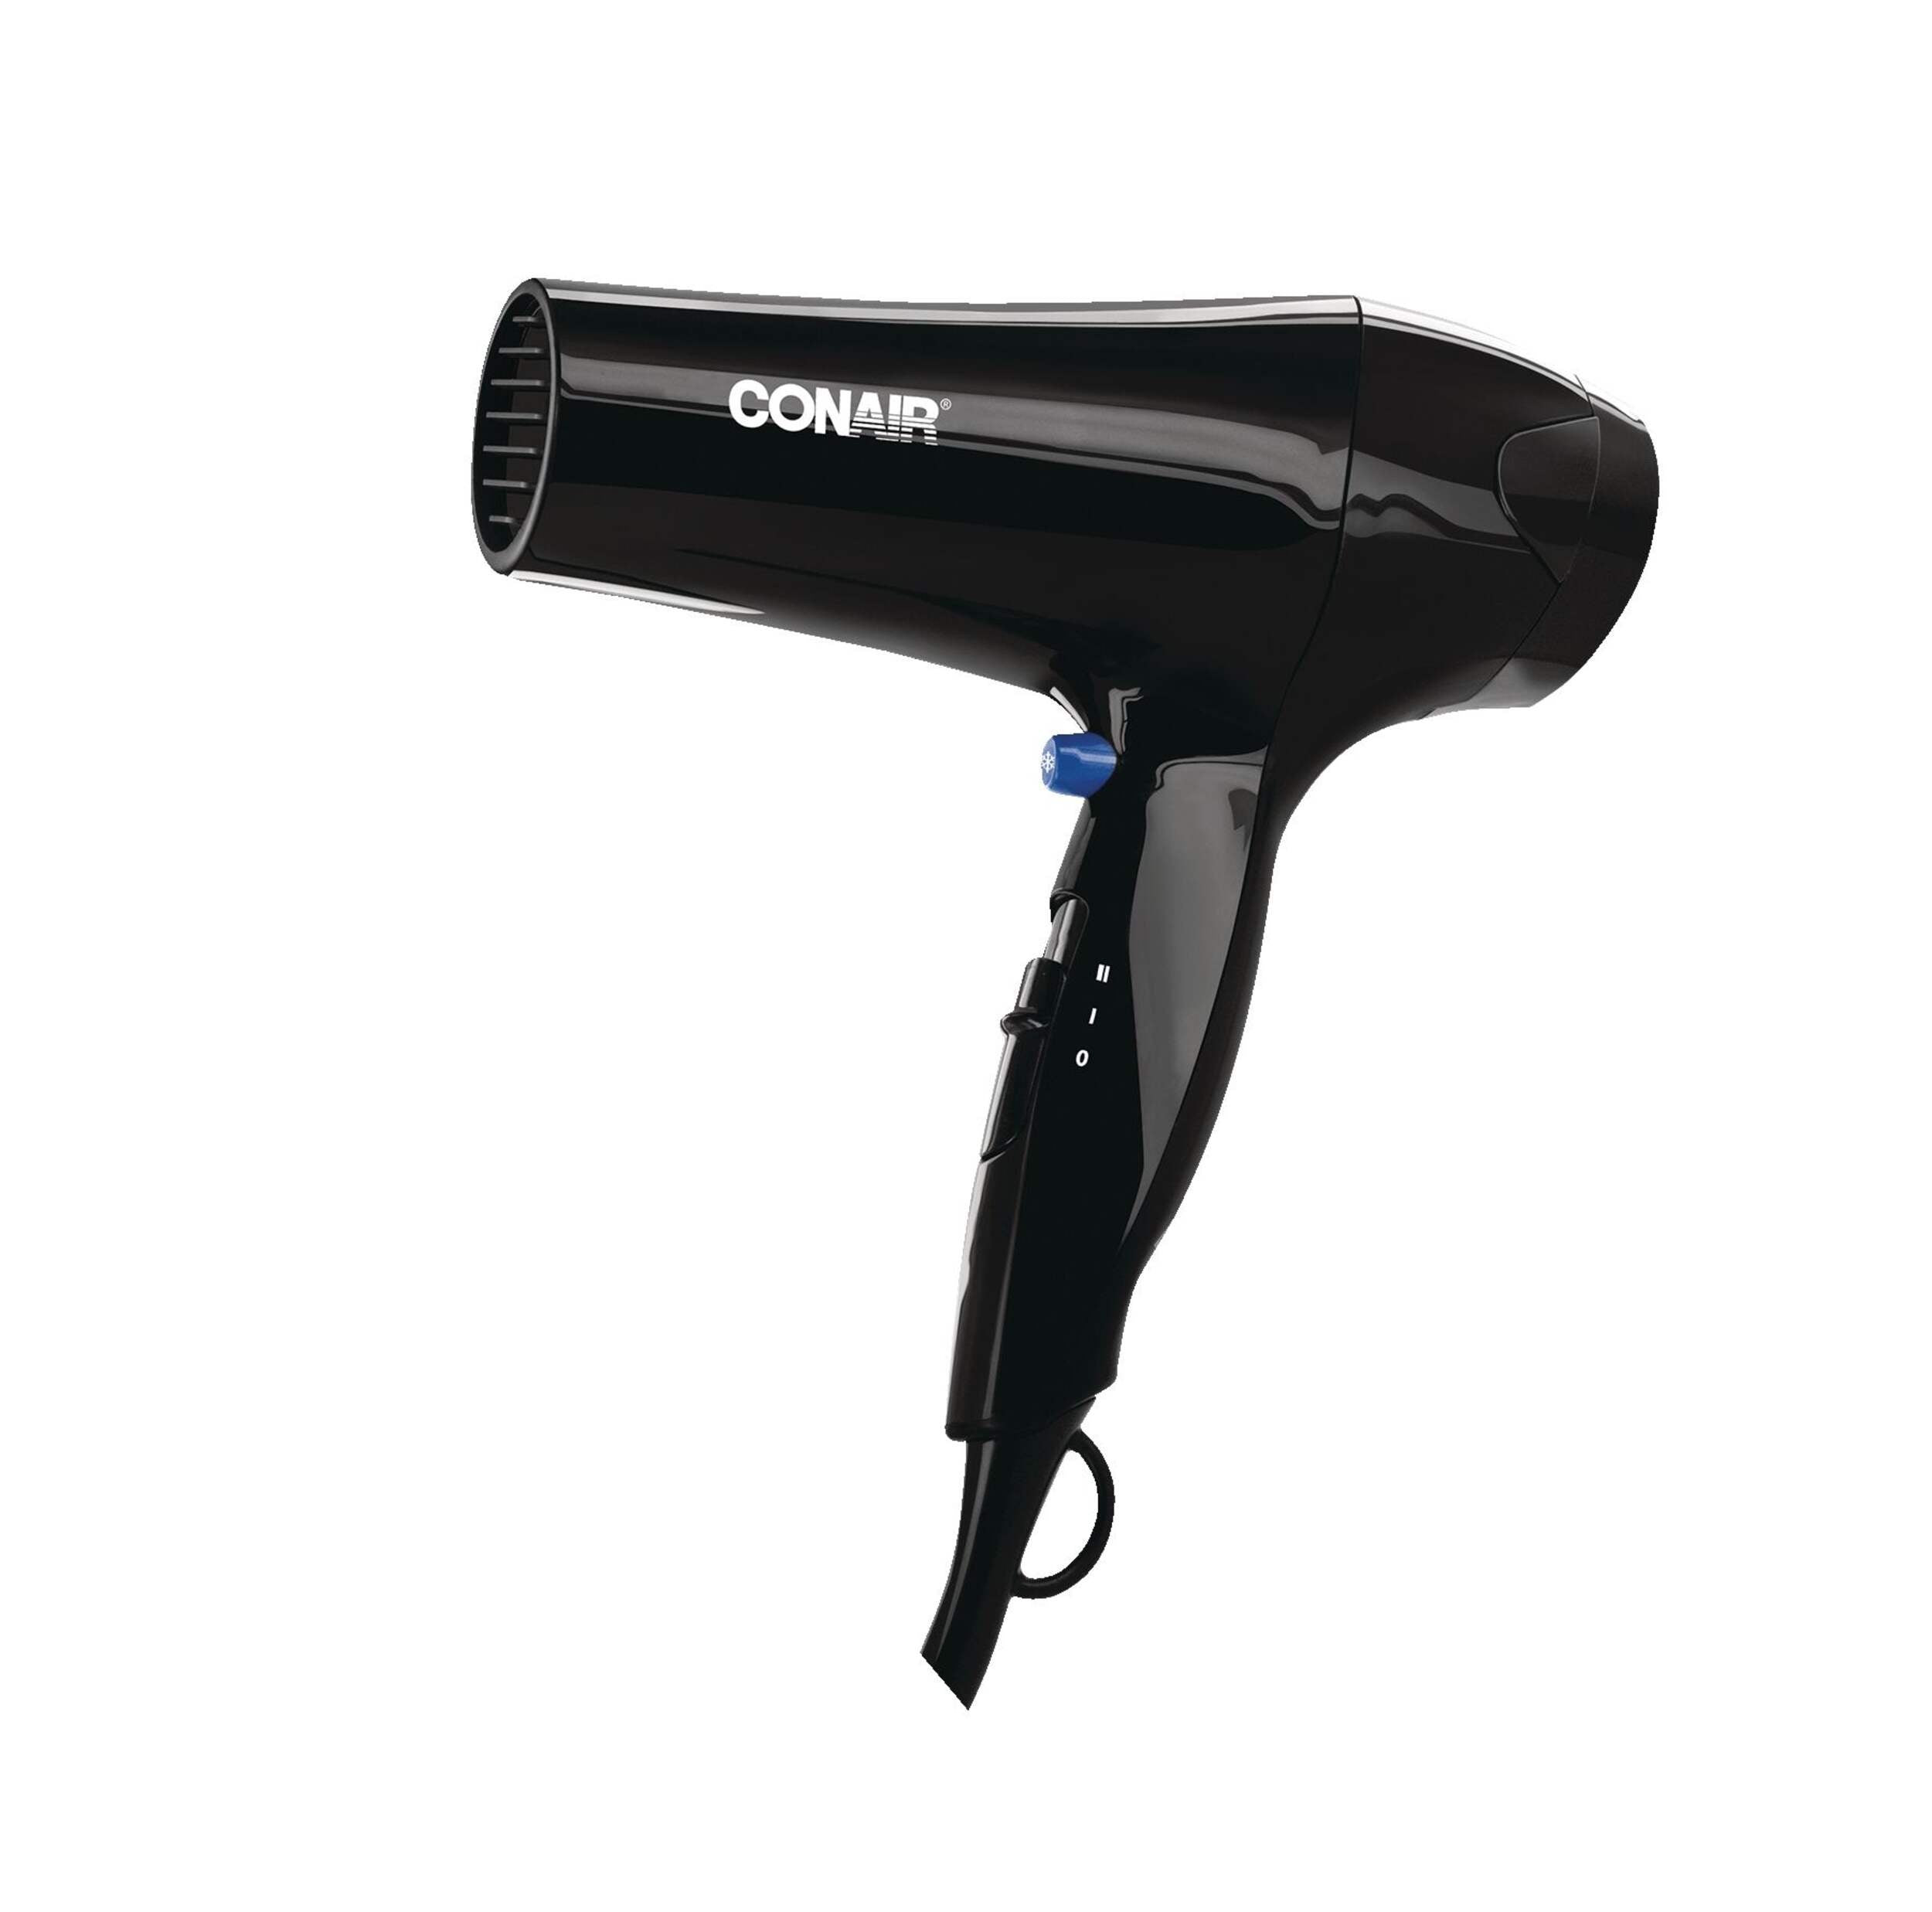 Conair 1875W Full-Size 2-Speed Ceramic Hair Dryer with Diffuser & Concentrator, Blemished packaging - 90 days warranty